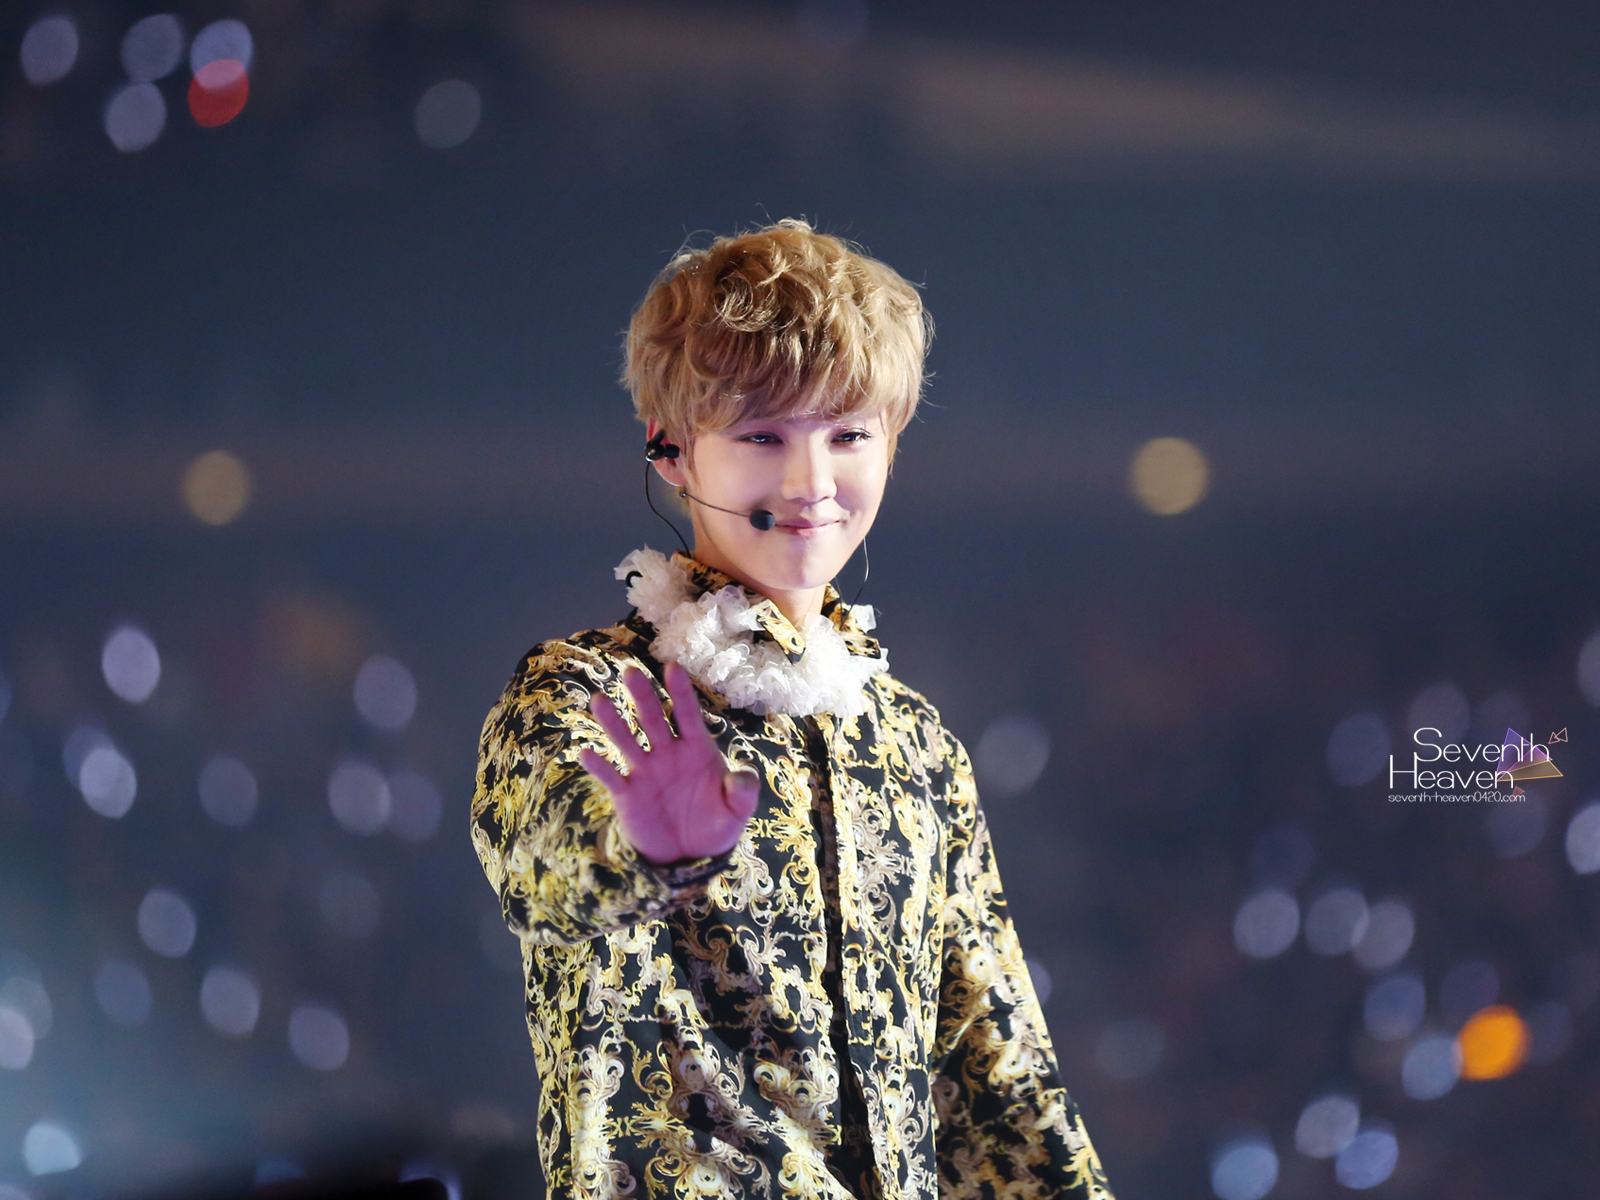 [FANTAKEN] 140823 EXO Concert 'The Lost Planet' in Singapore [101P] 14845958807_ff1feea60d_o